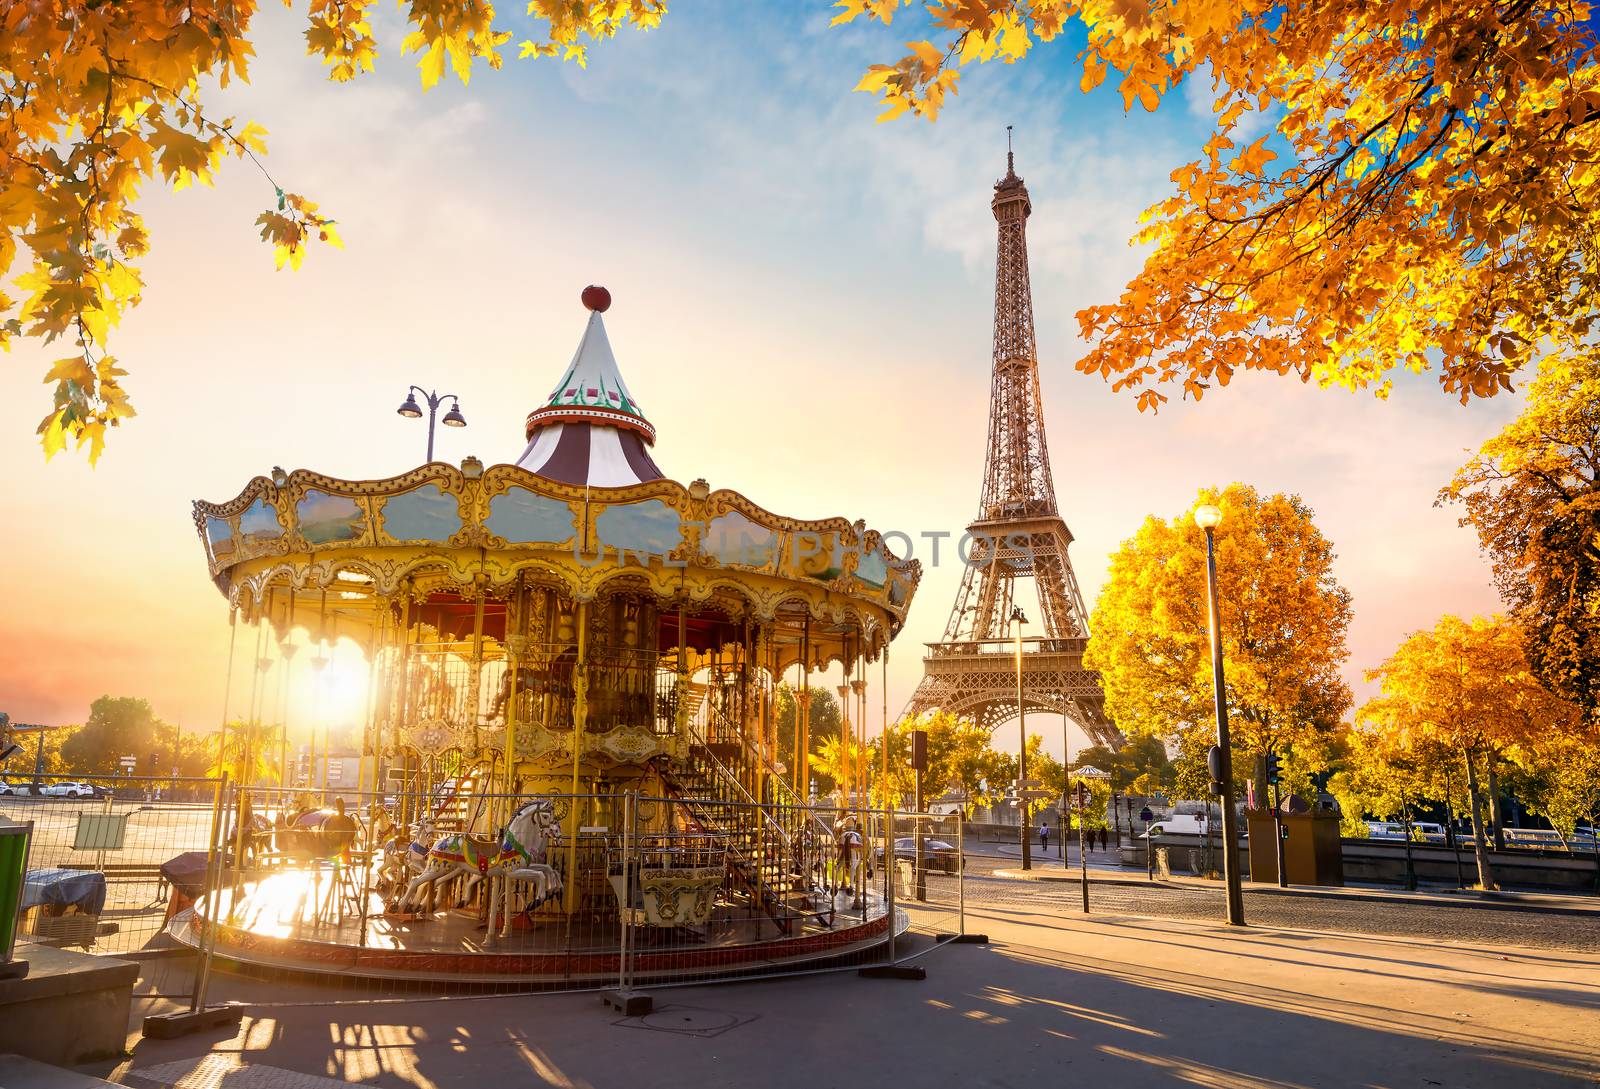 Carousel in autumn by Givaga